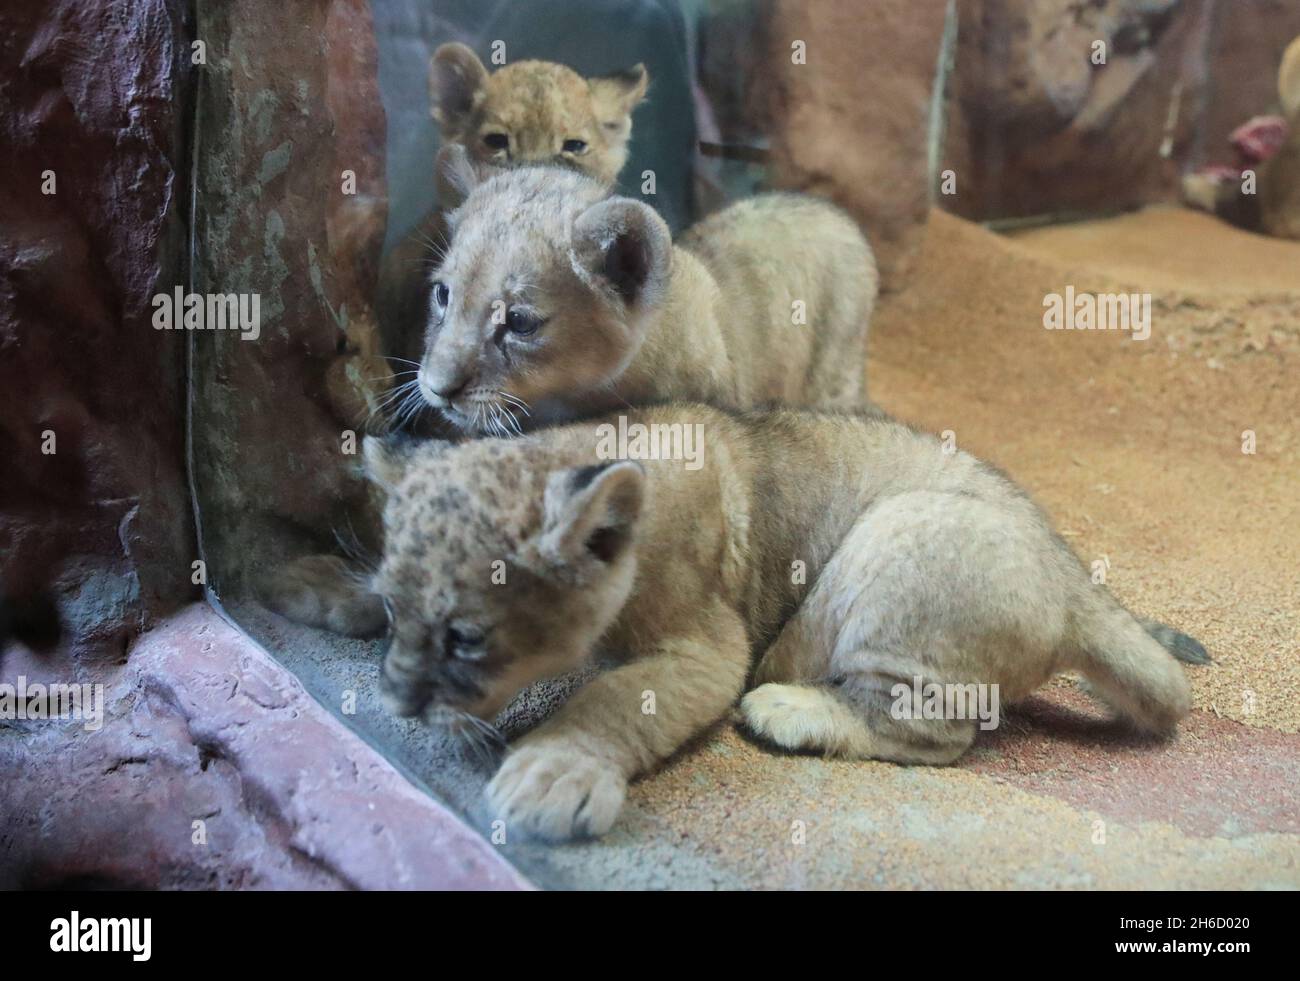 Five-weeks old African triplet lions Maleika, Jamila and Kumani play behind a window during their official presentation to the public at Gelsenkirchen's zoo 'Erlebniswelt Zoom' (Discovery World Zoom) in Gelsenkirchen, Germany, November 15, 2021.  REUTERS/Wolfgang Rattay Stock Photo